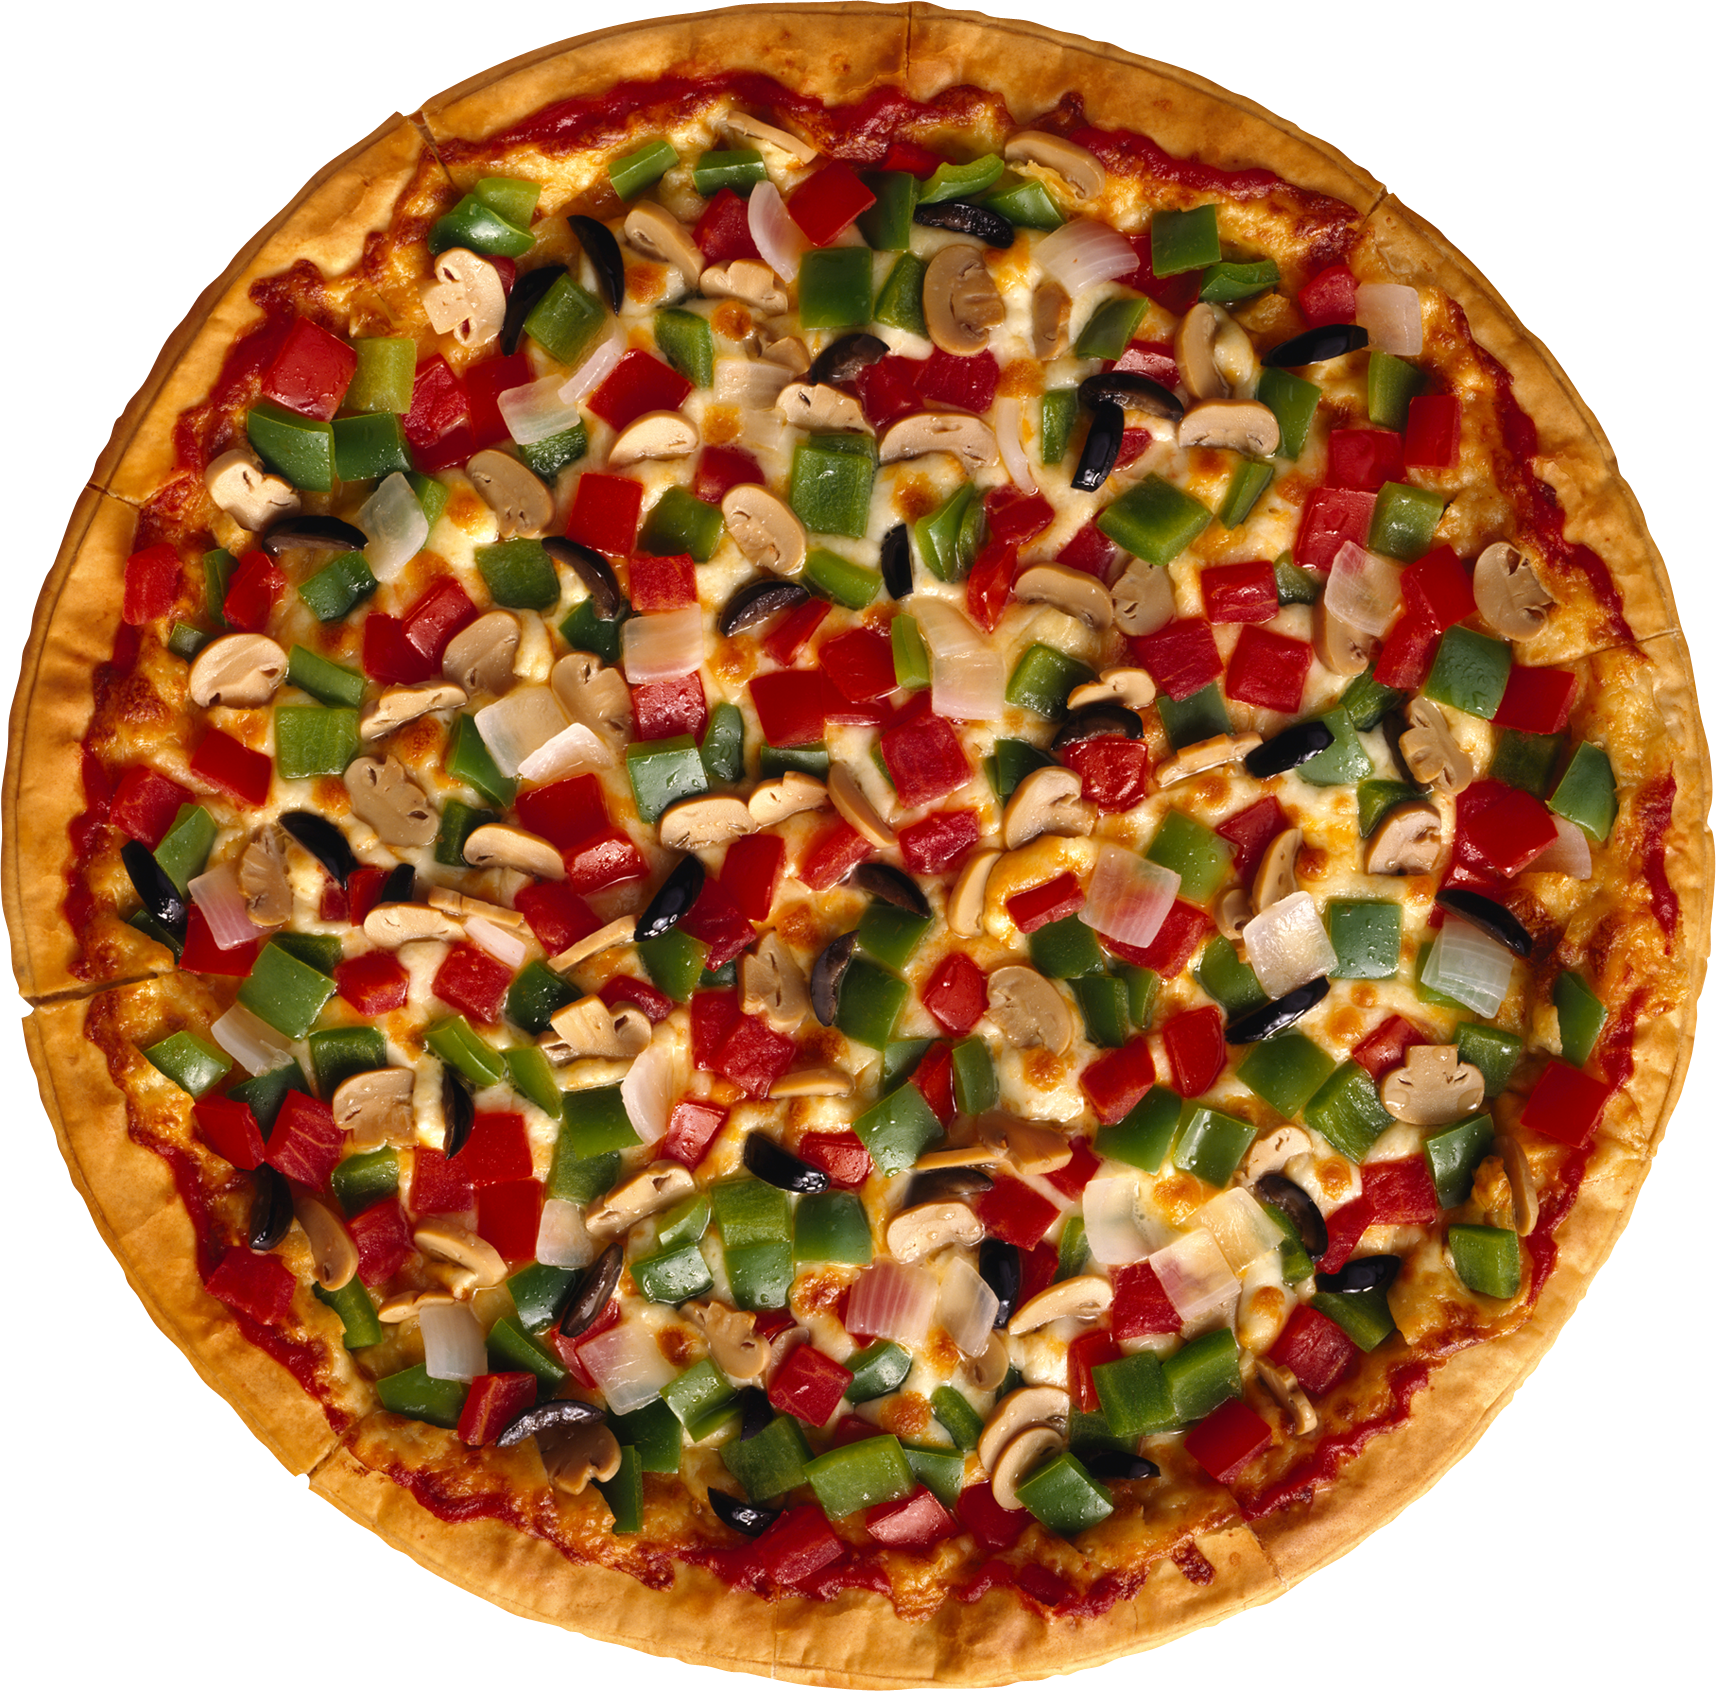 Pizza PNG image